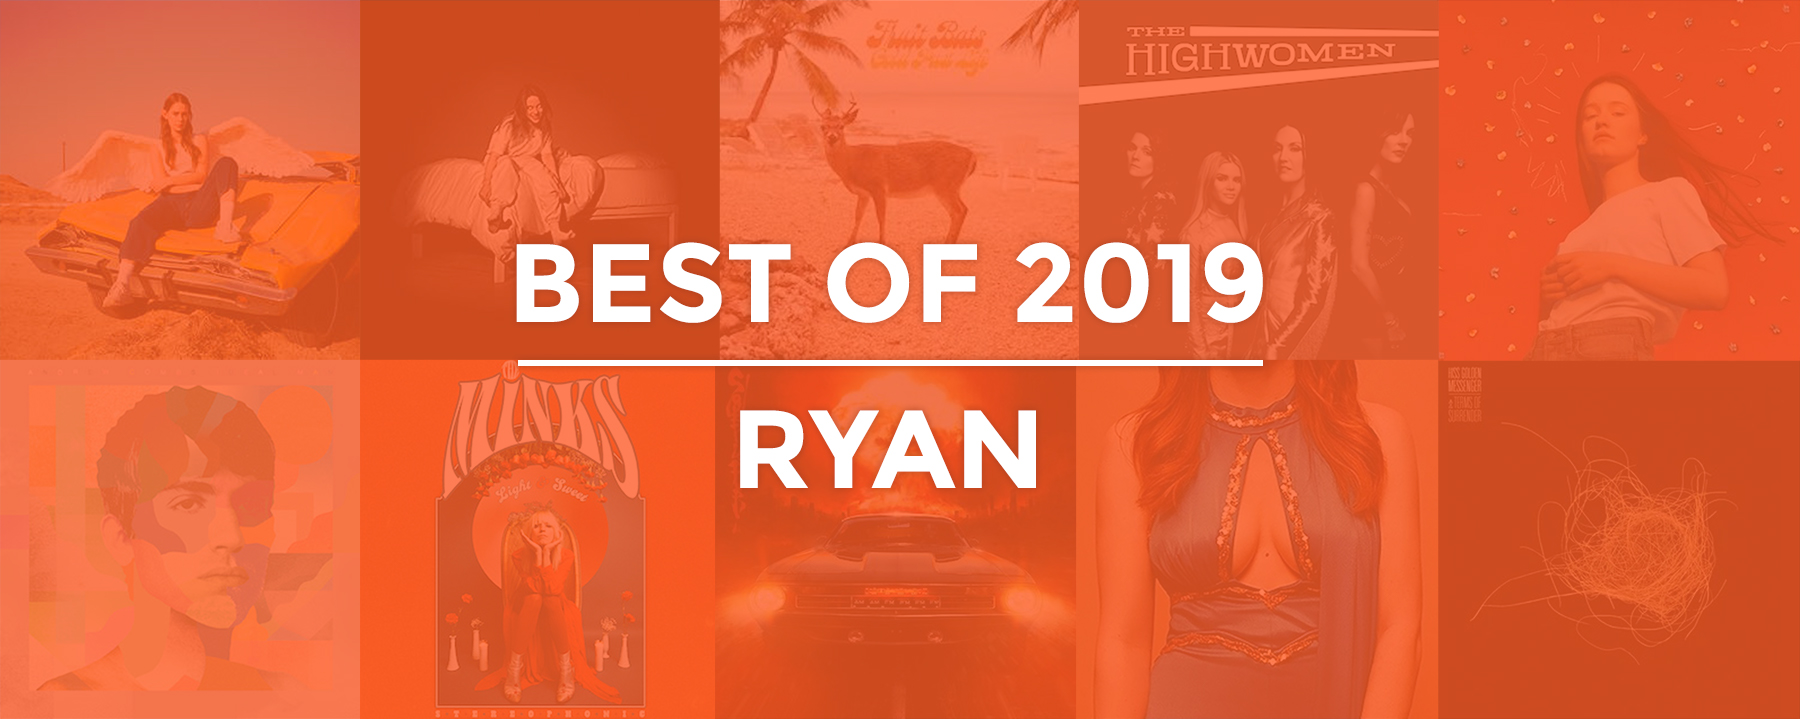 2019 | Ryan's Best Albums and EPs of the Year